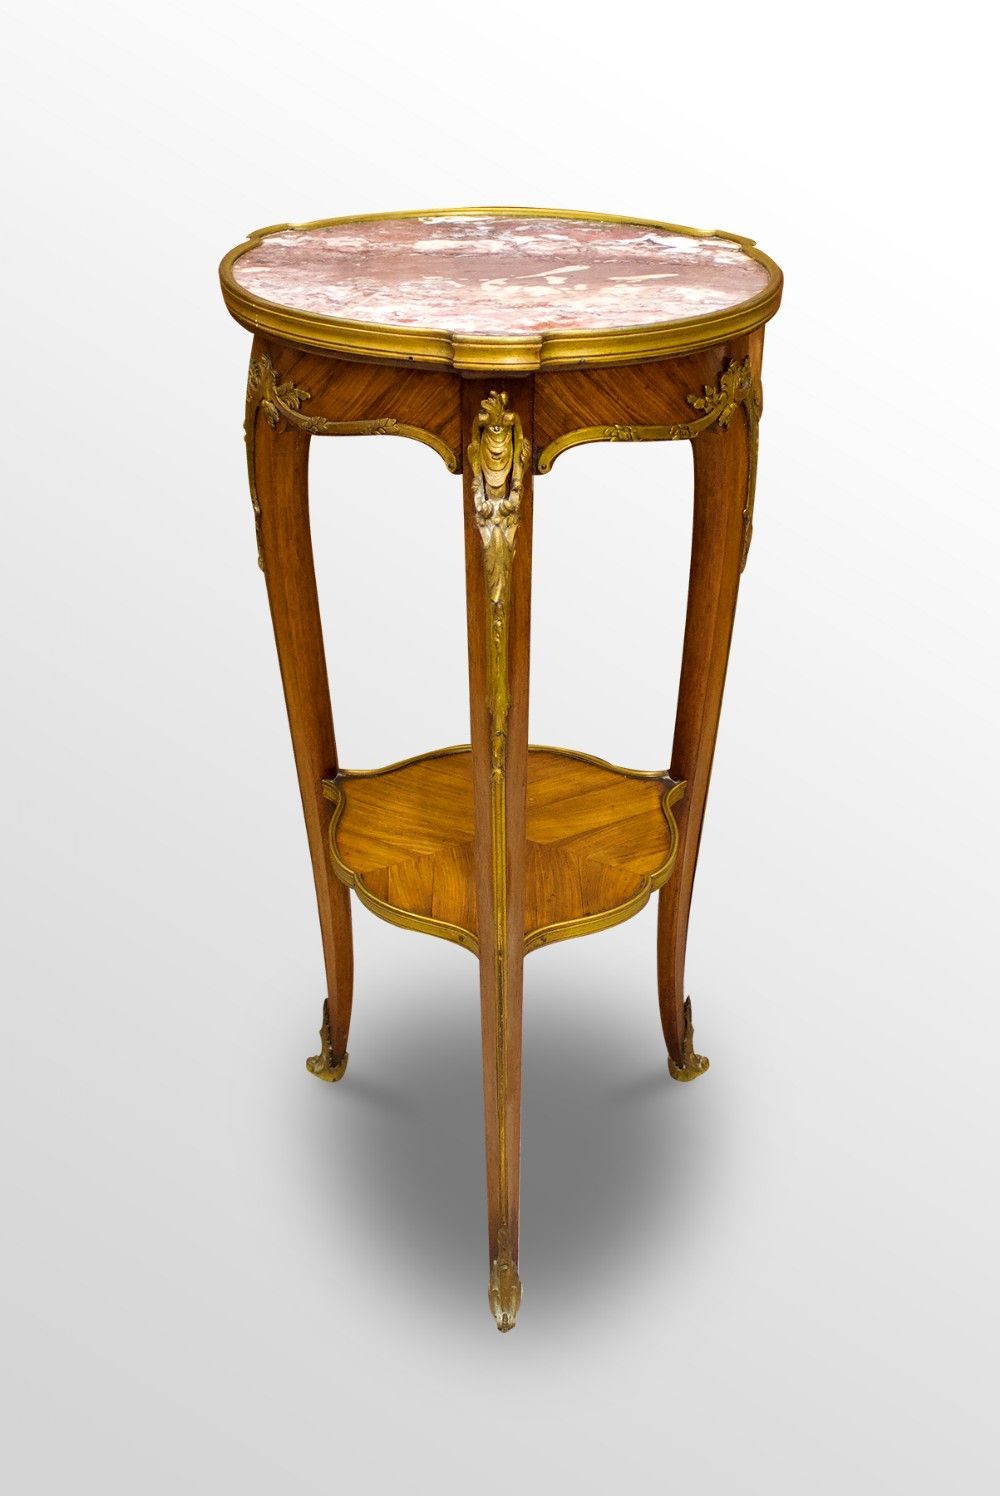 kingwood marble top gueridon table in the manner of francois linke